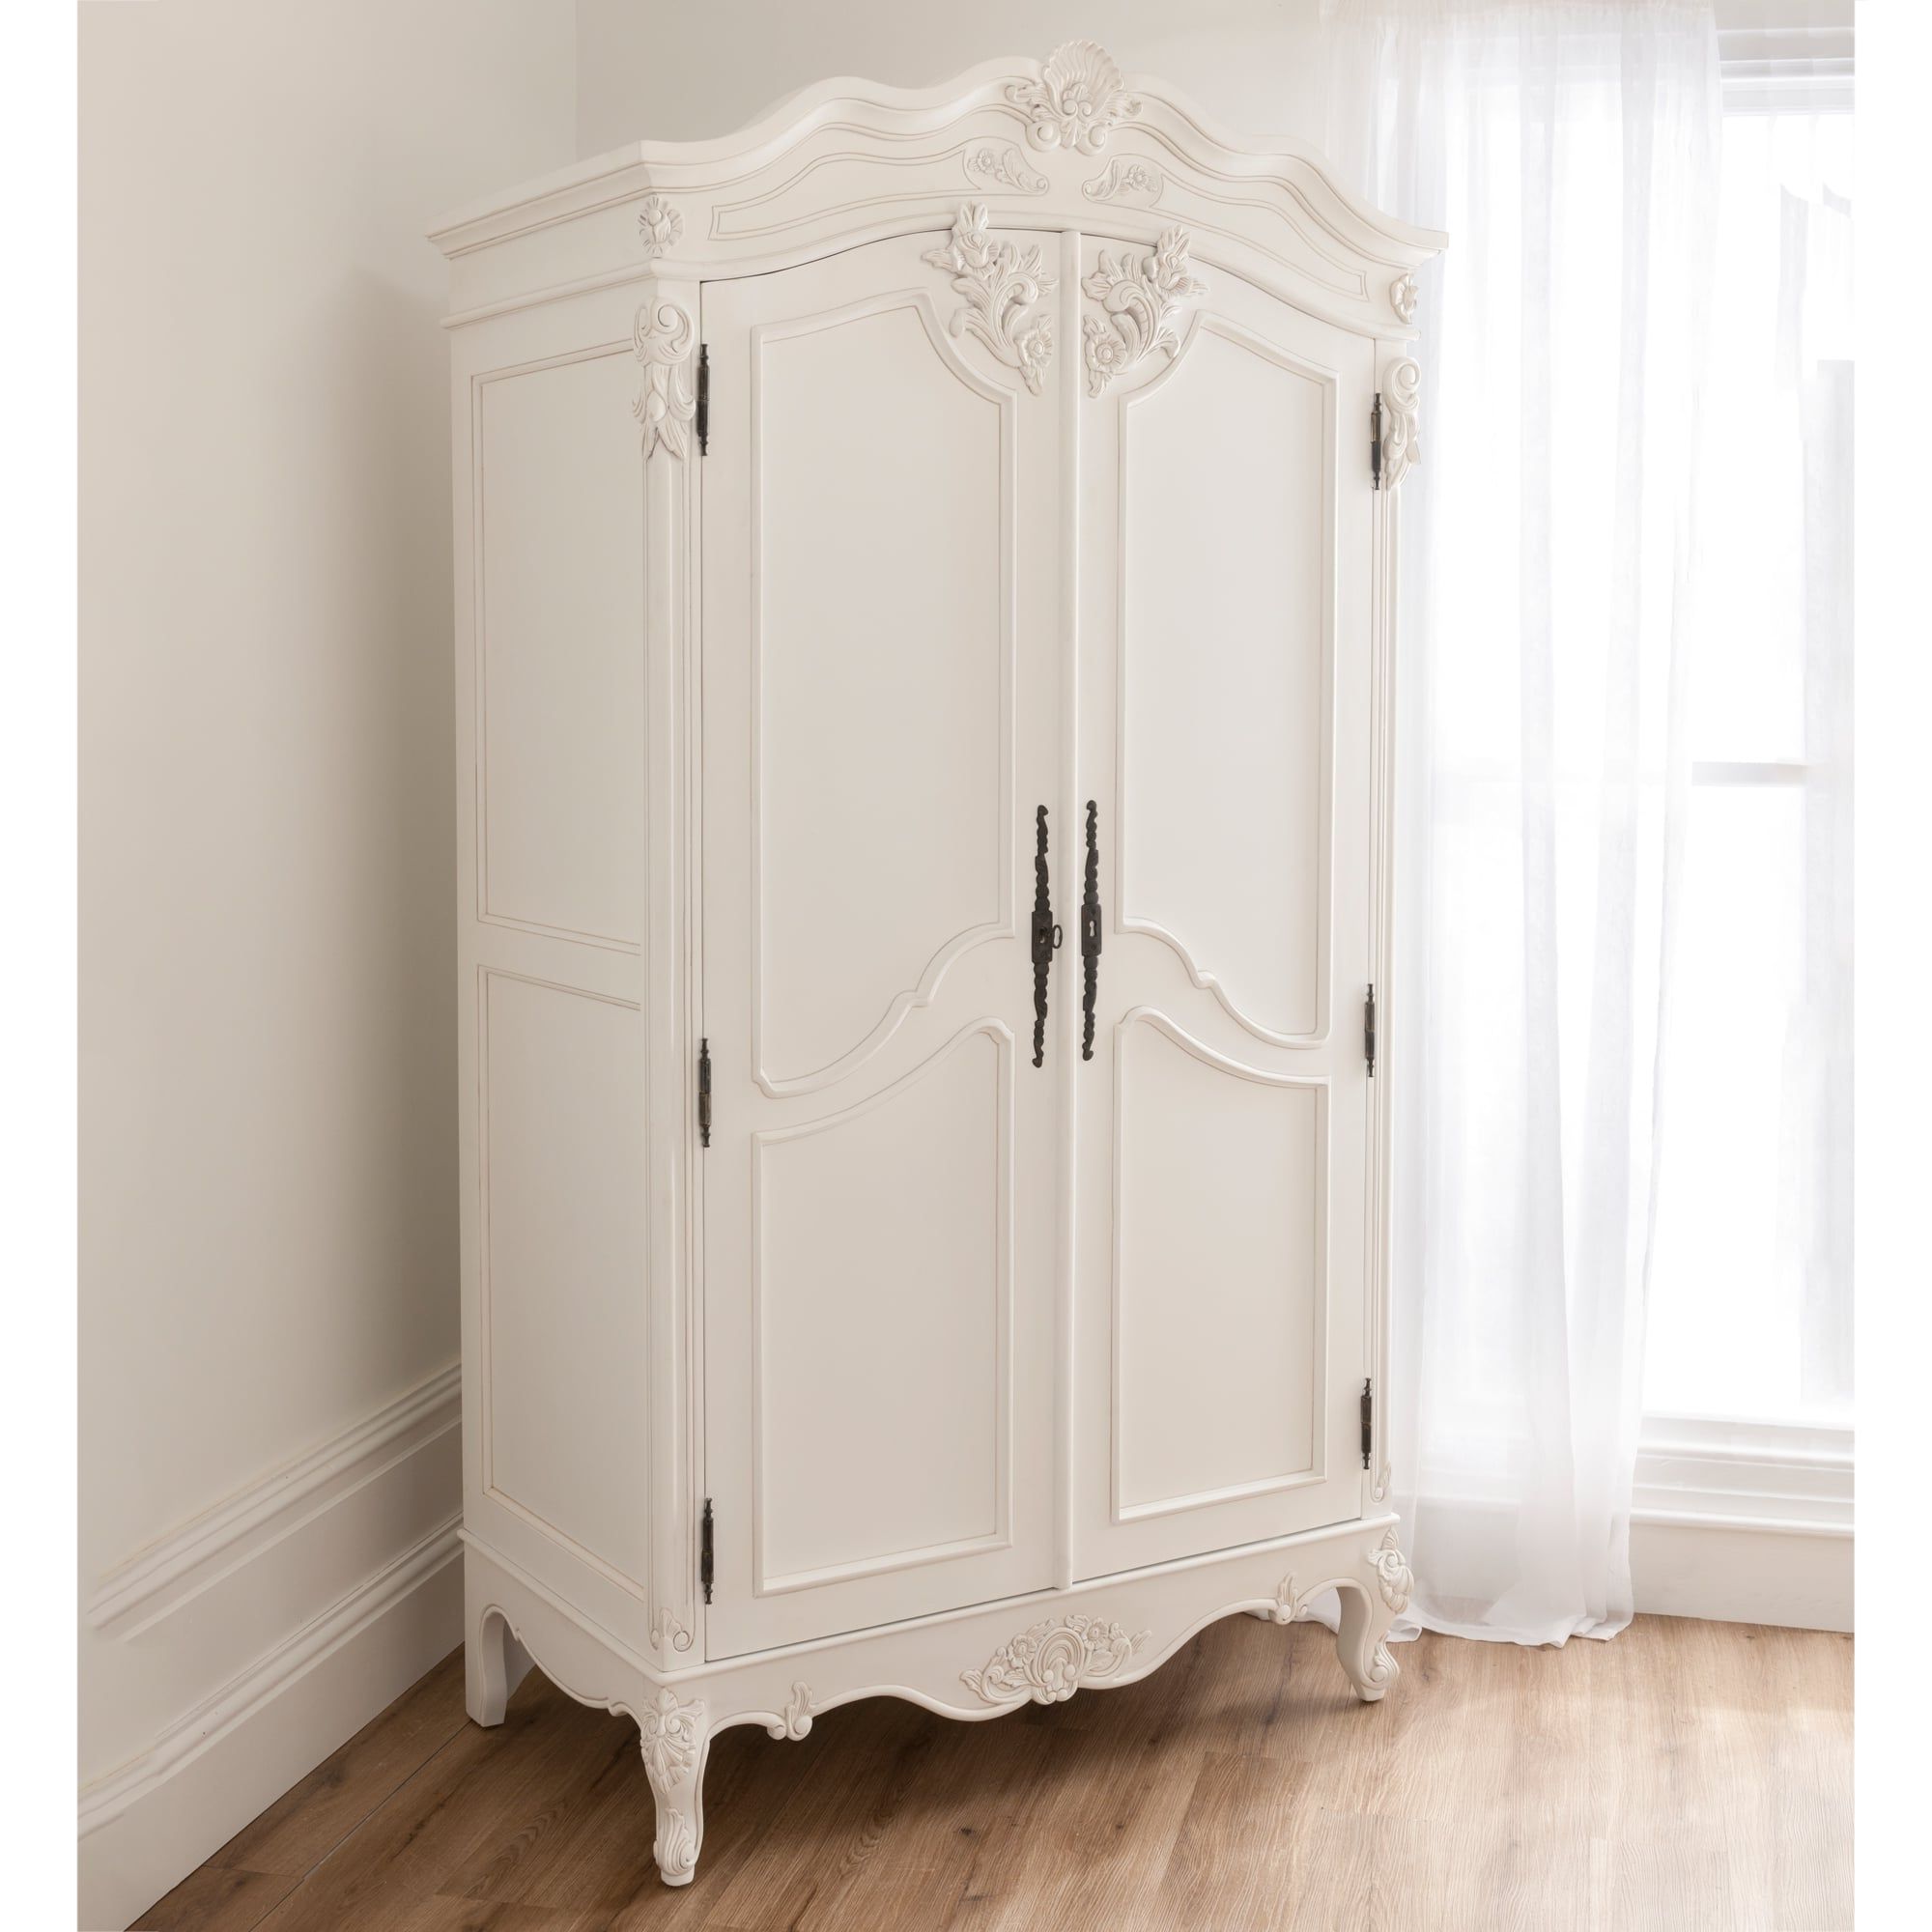 Baroque Antique French Wardrobe Is Available Online At Homesdirect365 For French Armoires Wardrobes (View 5 of 20)